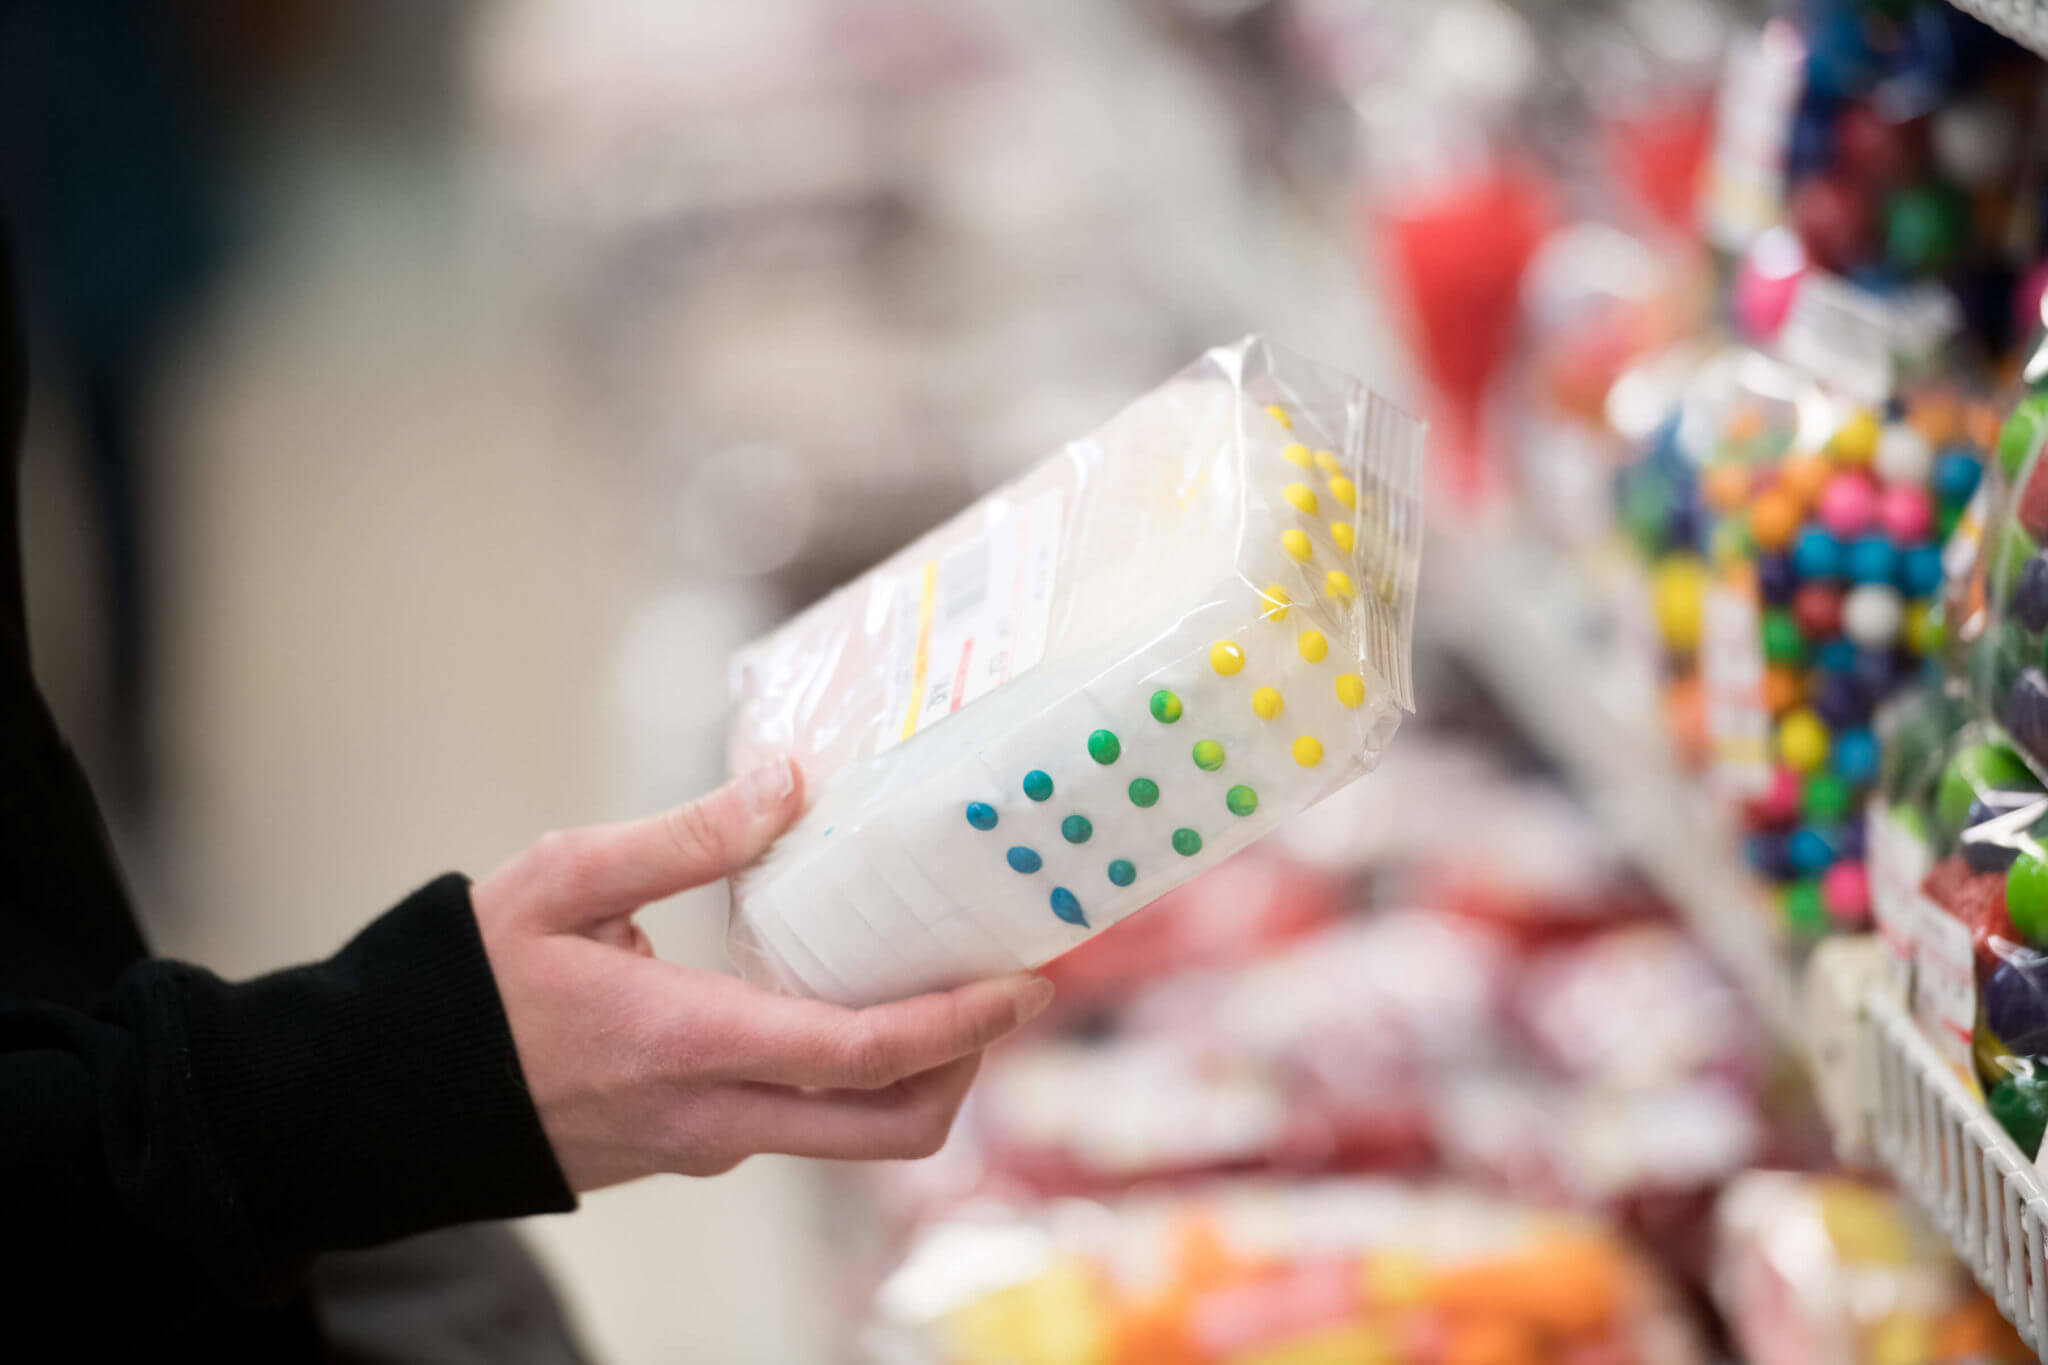 A shopper holds a package of colorful candy dots in a candy store.